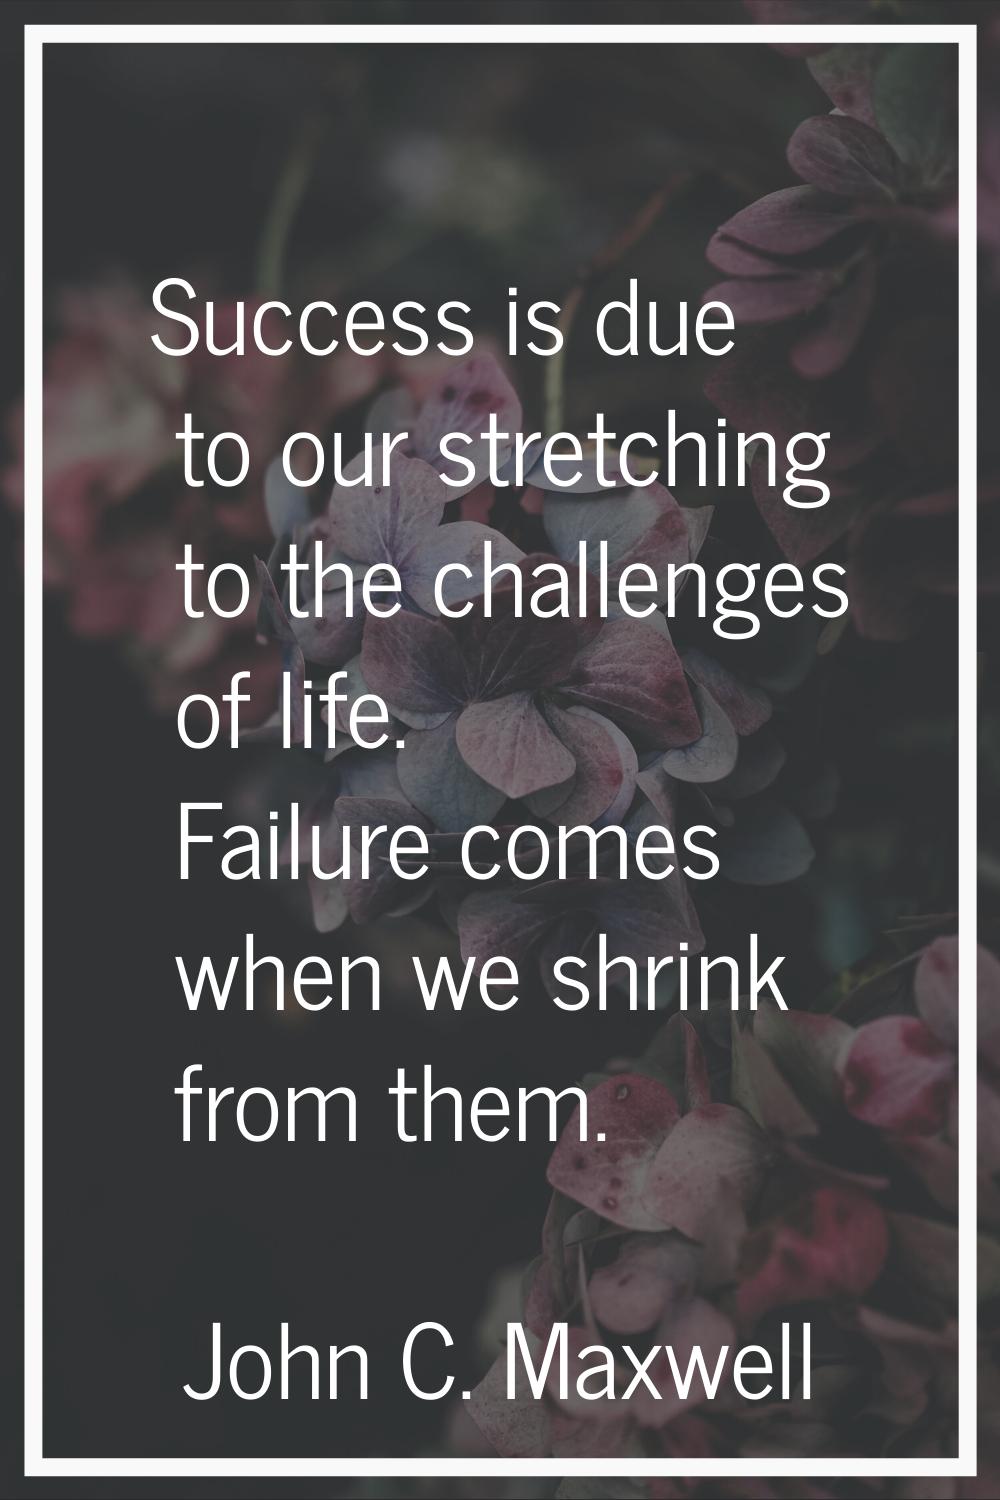 Success is due to our stretching to the challenges of life. Failure comes when we shrink from them.